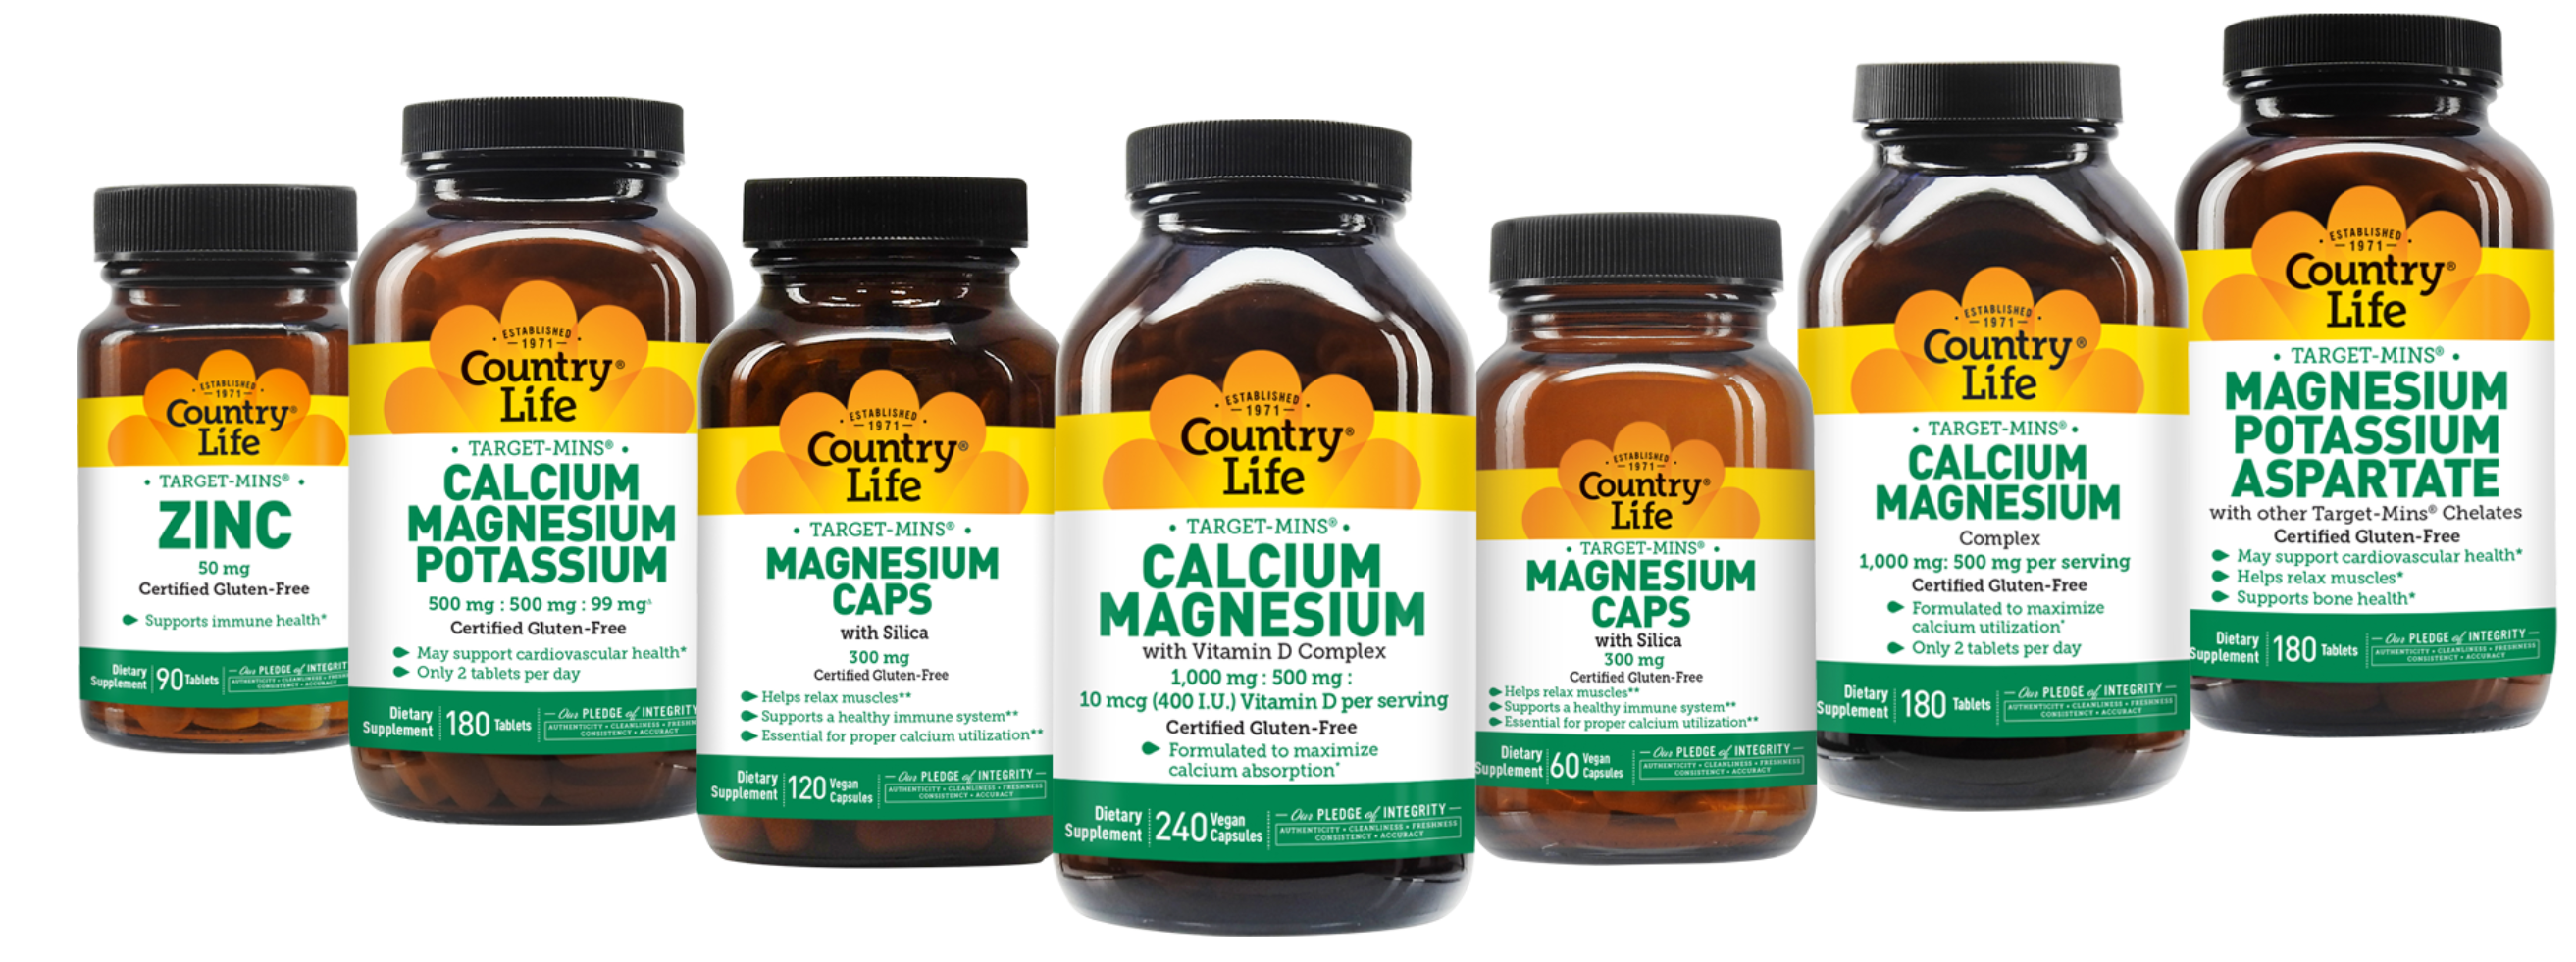 Identifying and Selecting the Right Magnesium